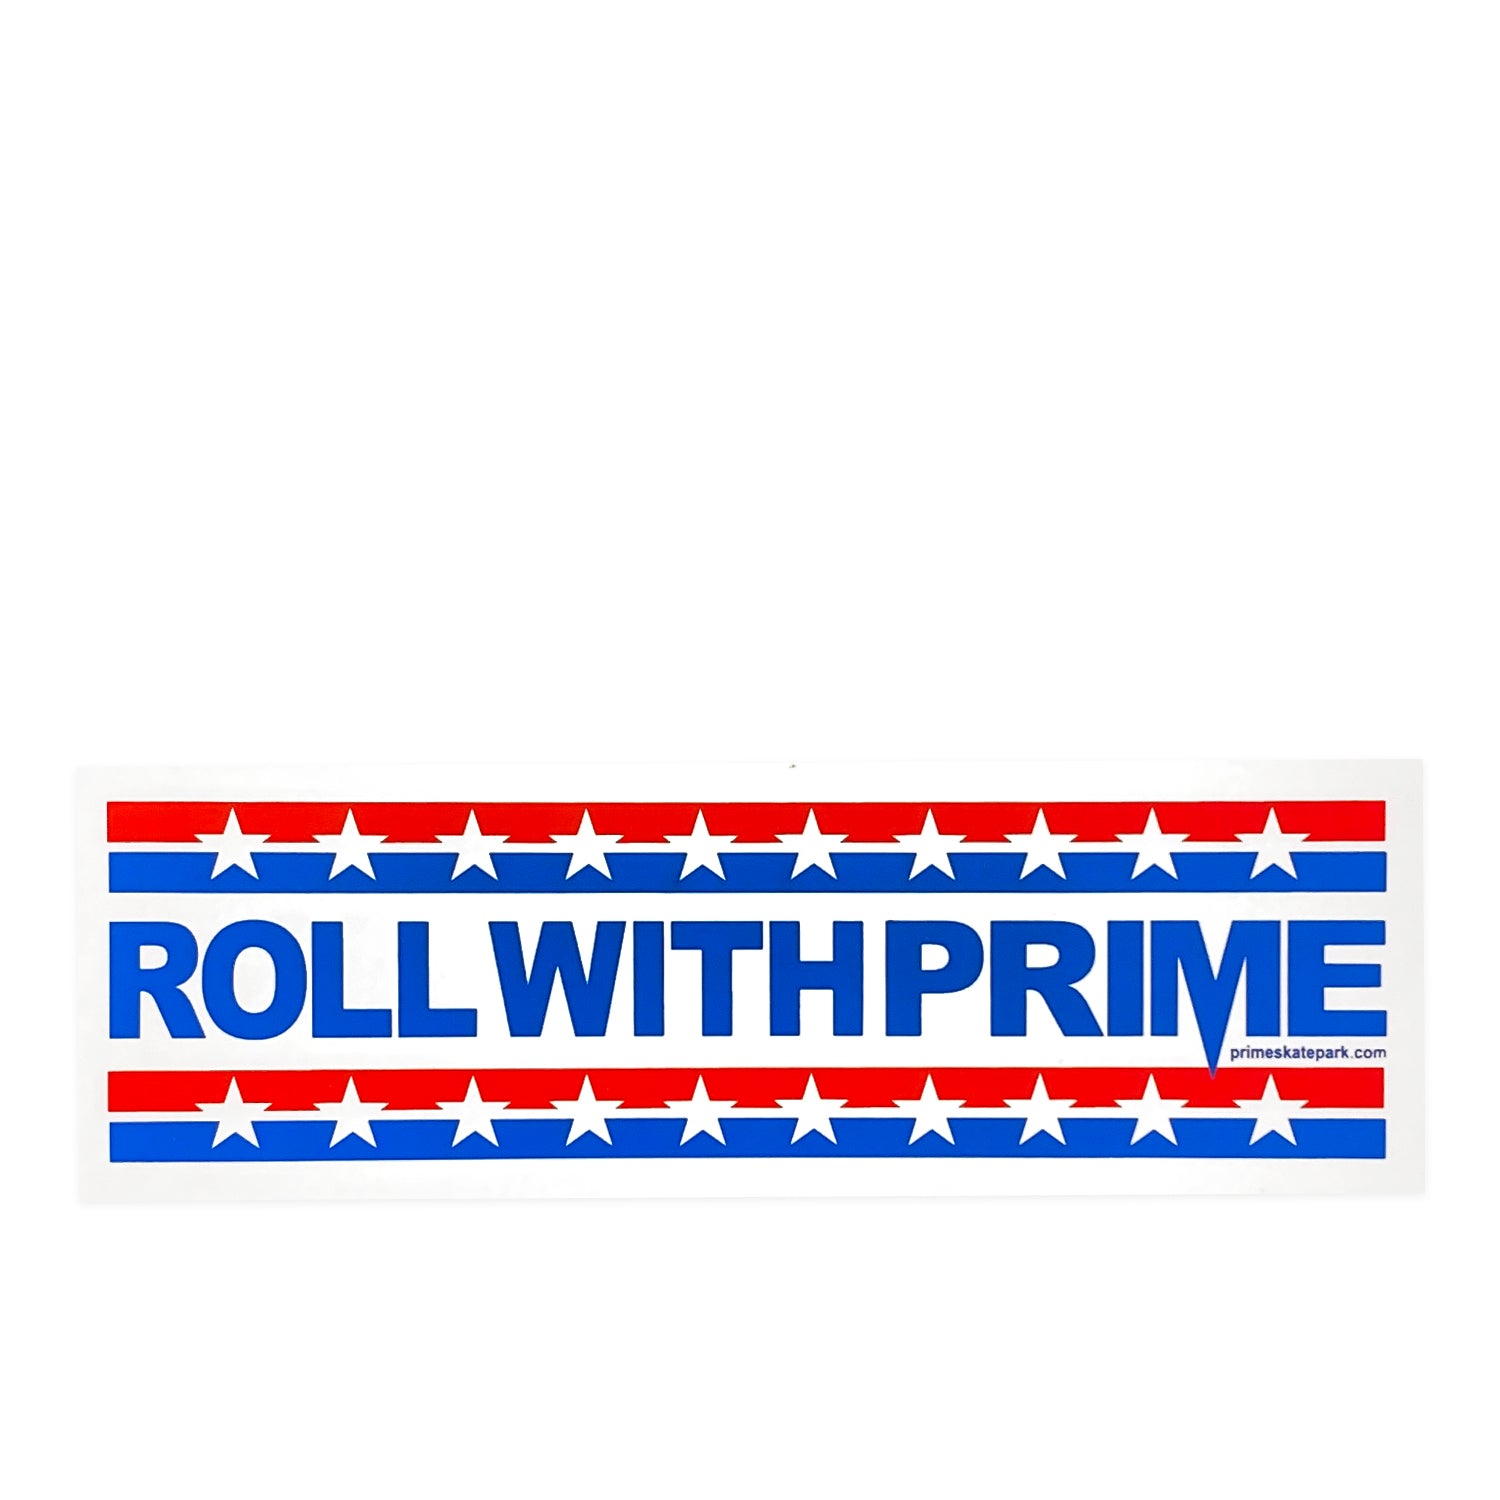 Prime Delux - Roll With Prime Sticker L - Red / Blue on White - Prime Delux Store